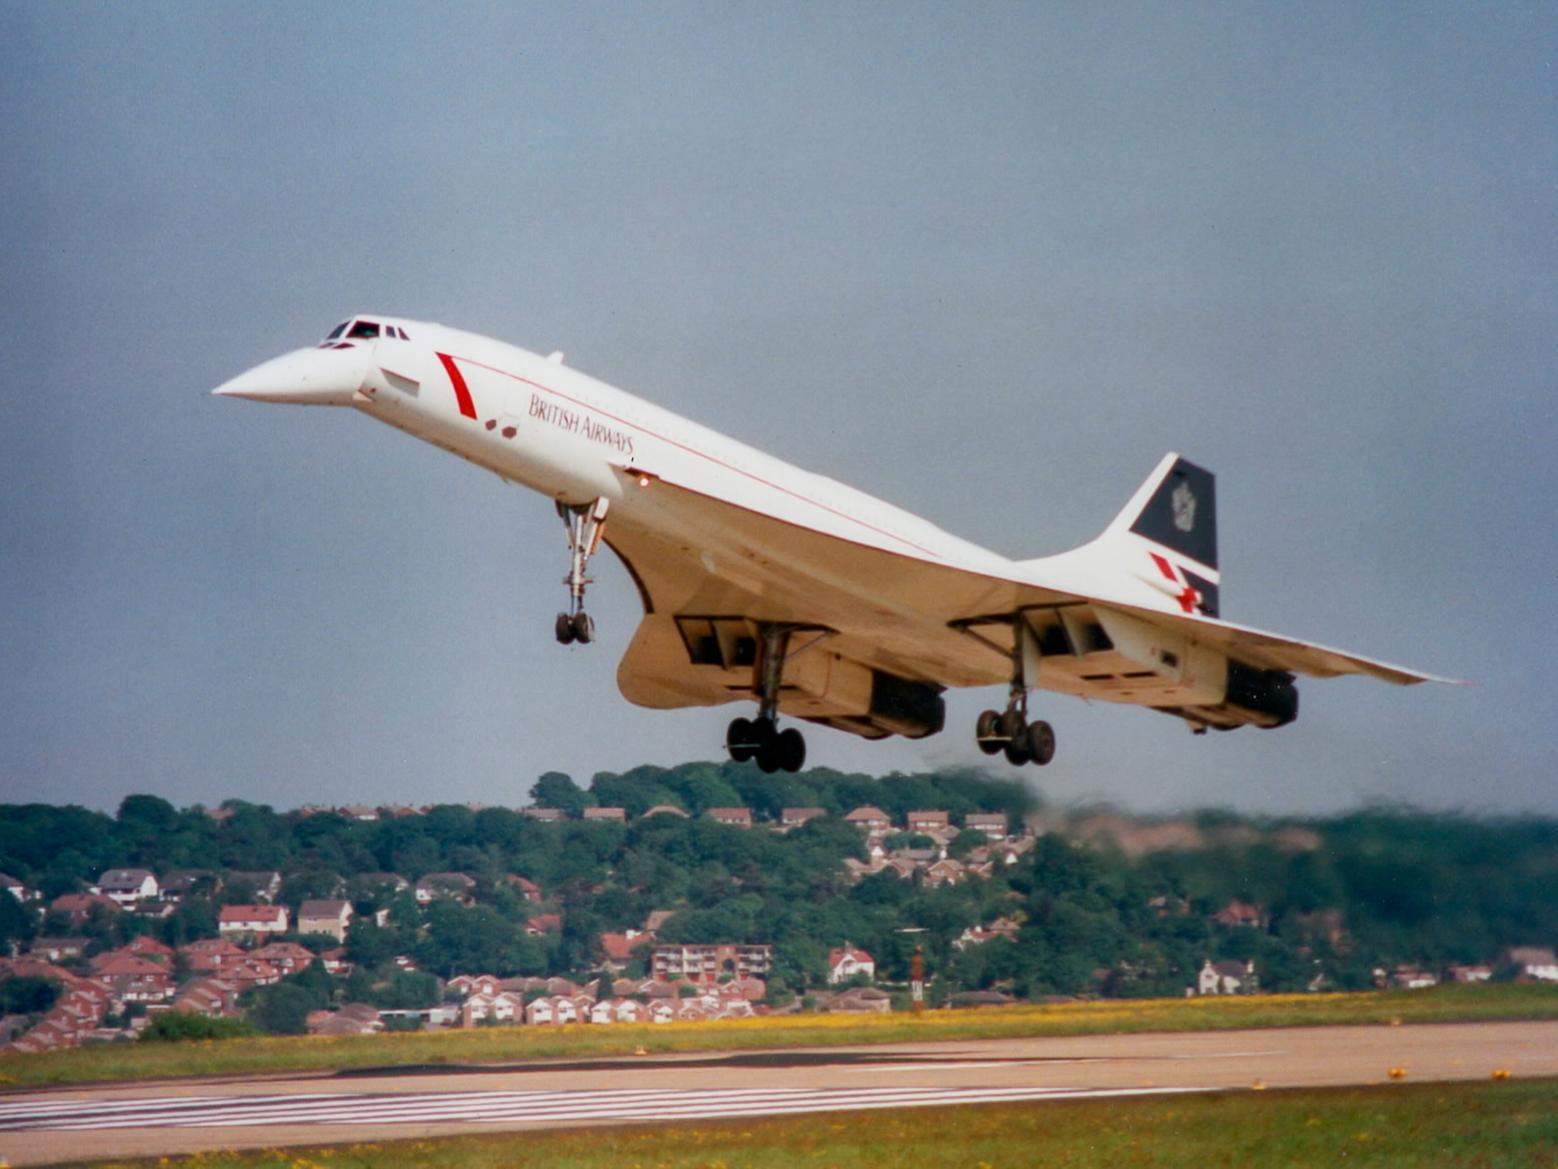 Concorde landing on runway 32 in June 1996. The photos was taken from Plane Tree Hill in Yeadon.